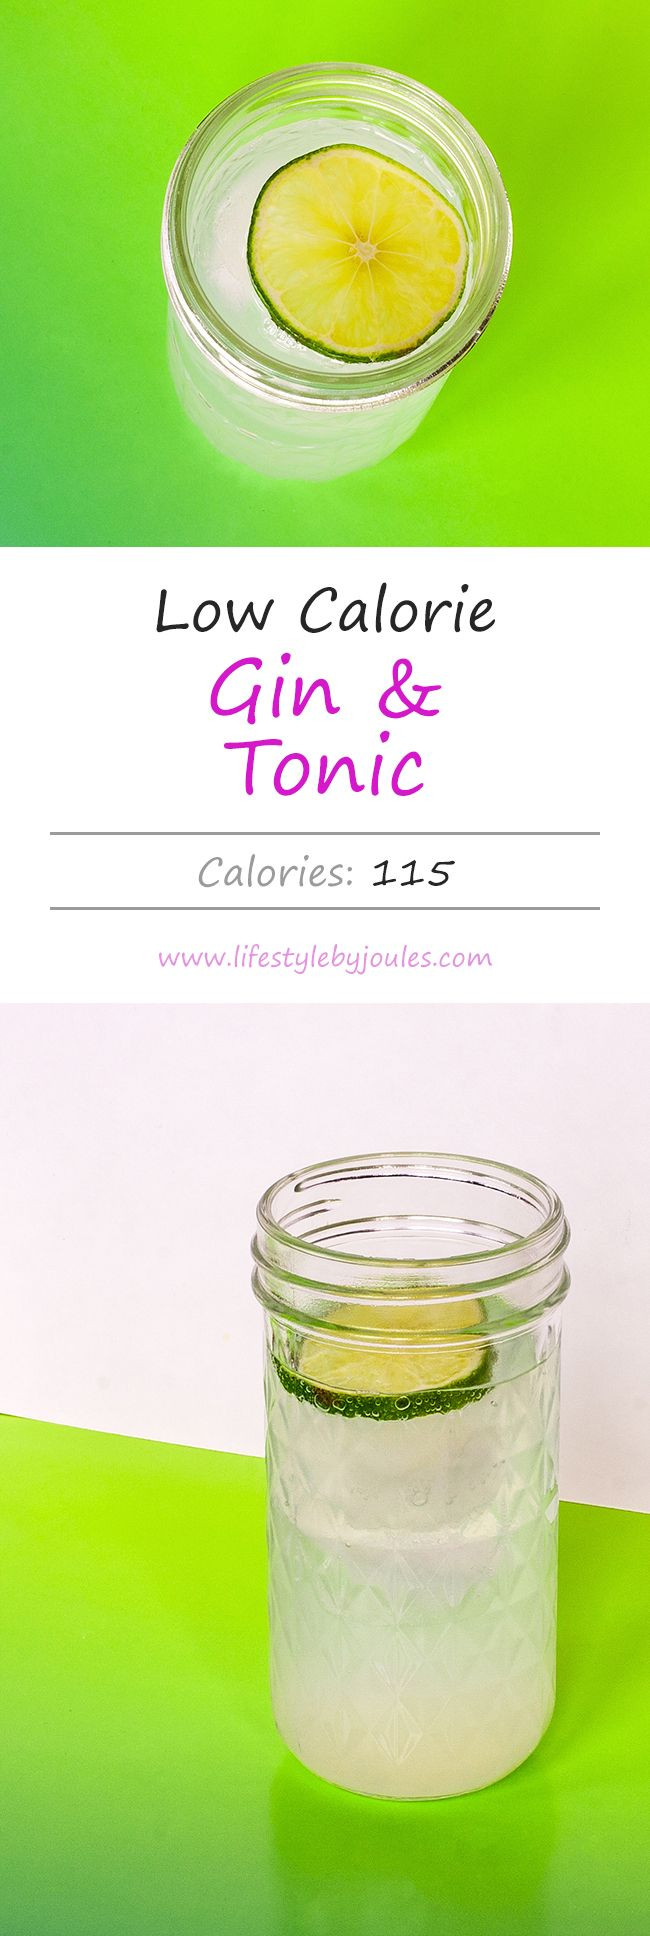 Low Calorie Gin Drinks
 17 Best images about Healthy Recipes on Pinterest